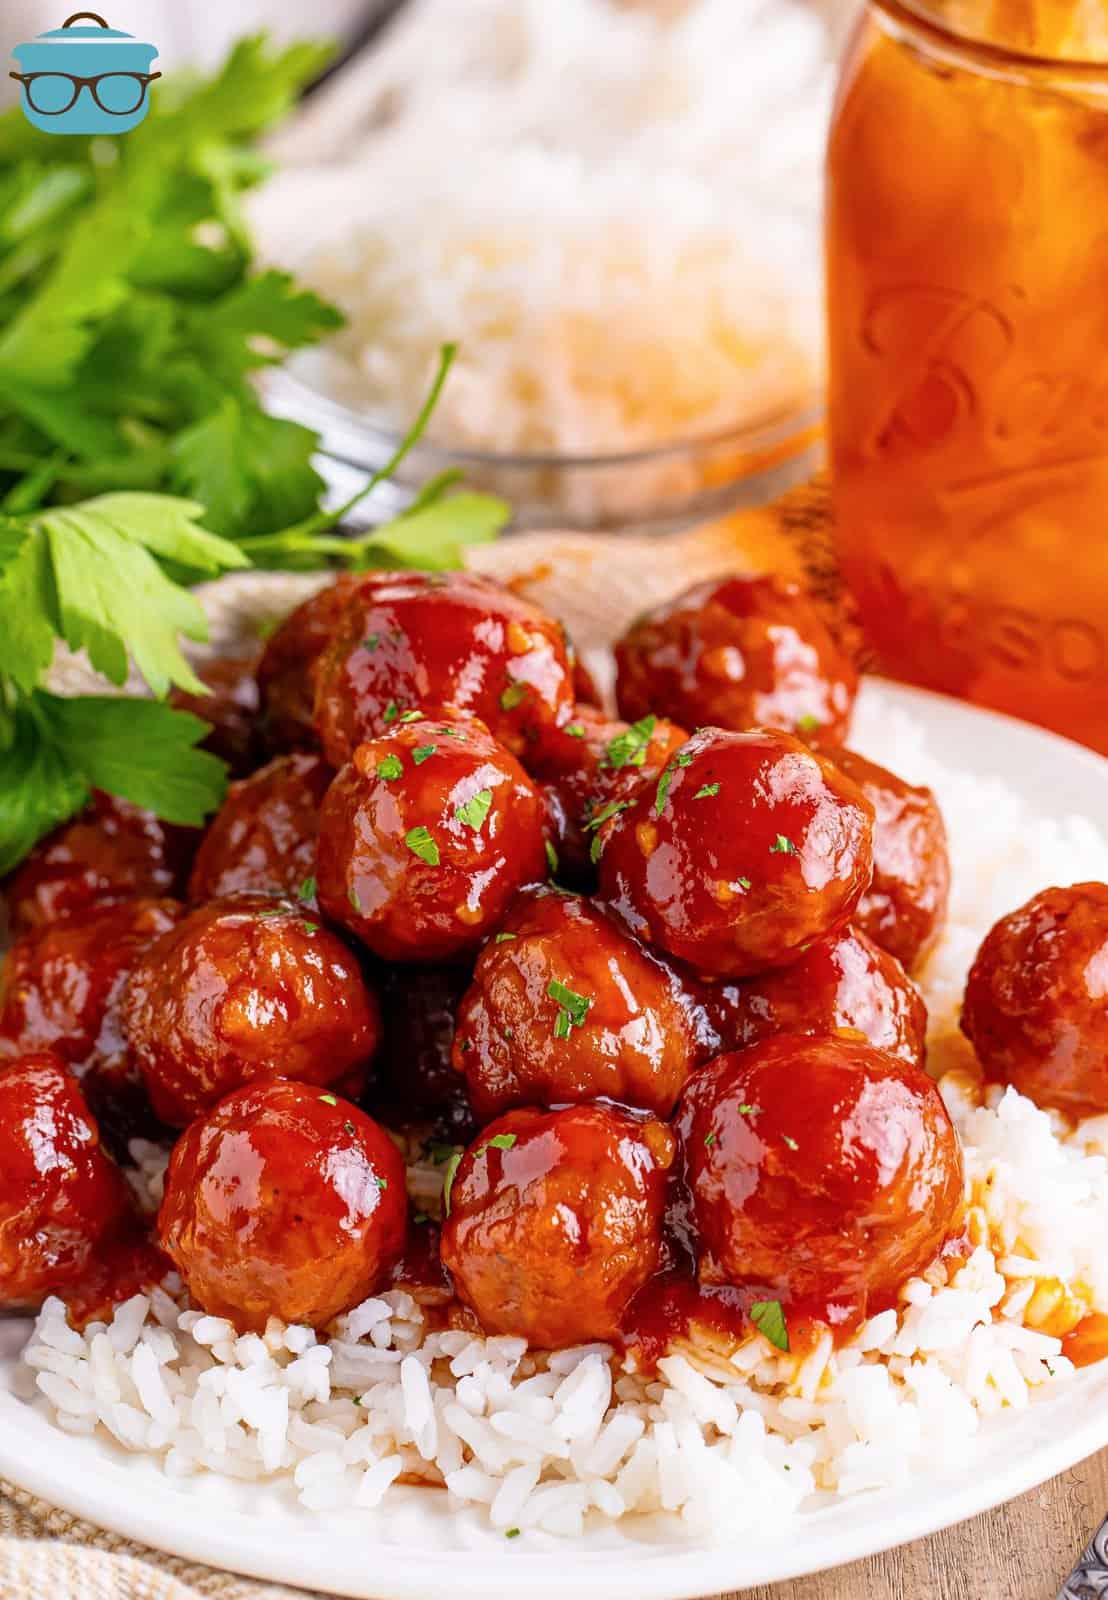 A plate of rice and honey garlic meatballs.